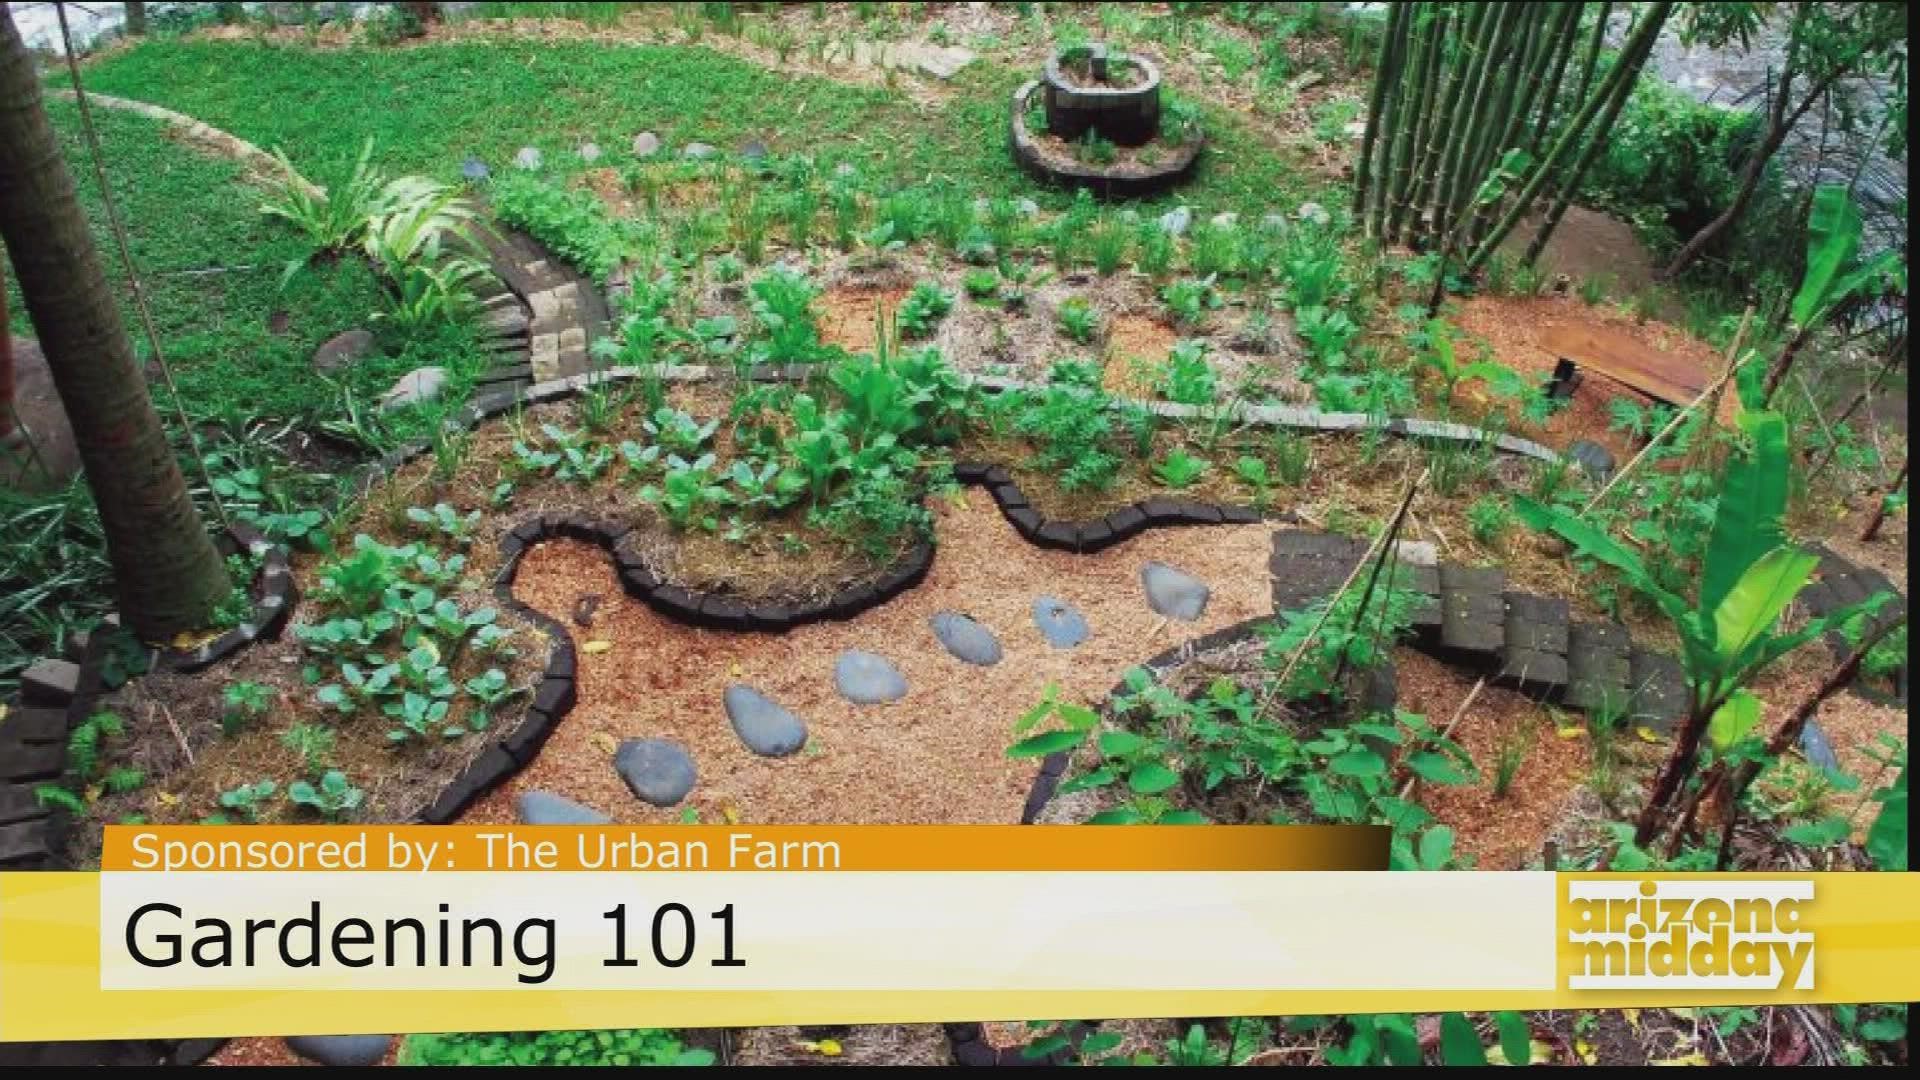 Greg Peterson, Founder of The Urban Farm, shares how to create & even take a Bee Oasis & Permaculture Design Course